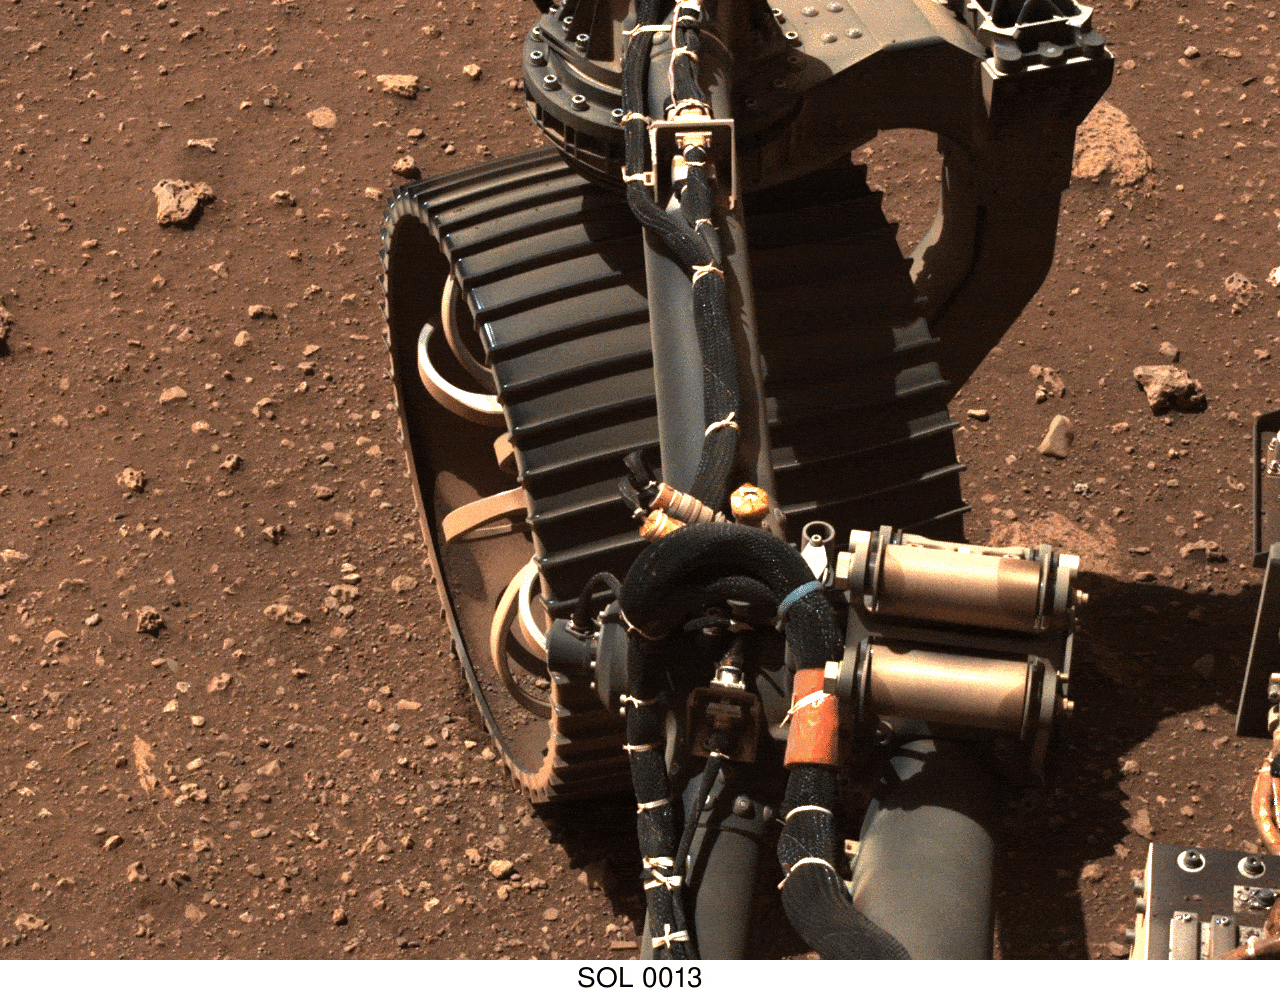 A GIF of the Mars Rover's wheel moving